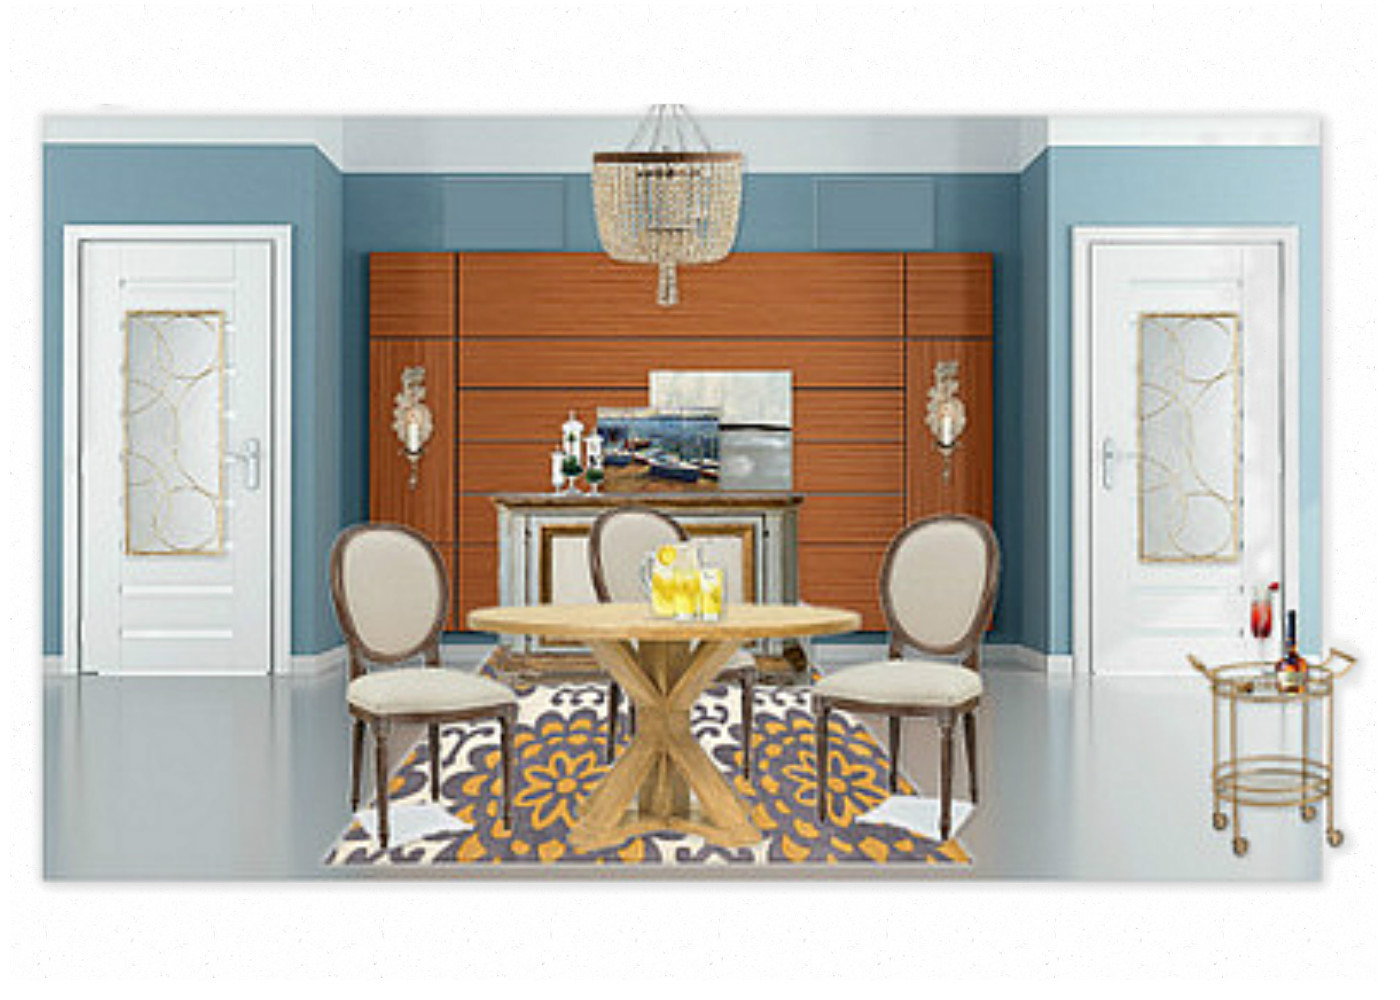 ... halftime. Collection living has an atom or Design Your Dream Room